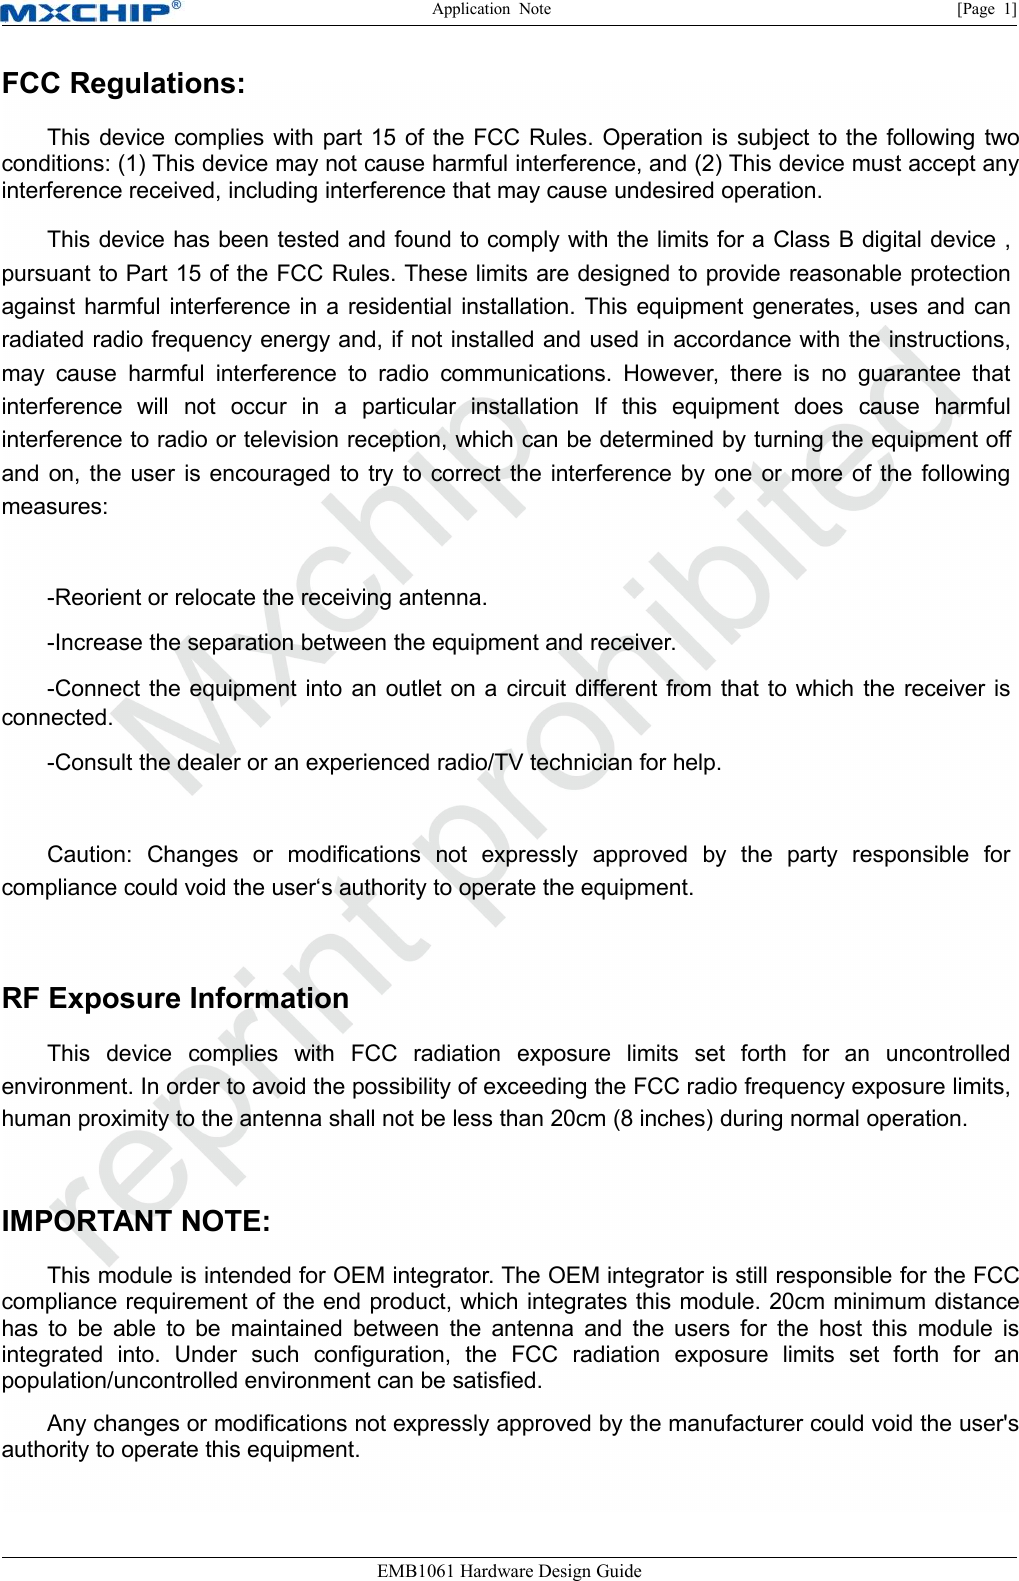 Application Note [Page 1]EMB1061 Hardware Design GuideFCC Regulations:This device complies with part 15 of the FCC Rules. Operation is subject to the following twoconditions: (1) This device may not cause harmful interference, and (2) This device must accept anyinterference received, including interference that may cause undesired operation.This device has been tested and found to comply with the limits for a Class B digital device ,pursuant to Part 15 of the FCC Rules. These limits are designed to provide reasonable protectionagainst harmful interference in a residential installation. This equipment generates, uses and canradiated radio frequency energy and, if not installed and used in accordance with the instructions,may cause harmful interference to radio communications. However, there is no guarantee thatinterference will not occur in a particular installation If this equipment does cause harmfulinterference to radio or television reception, which can be determined by turning the equipment offand on, the user is encouraged to try to correct the interference by one or more of the followingmeasures:-Reorient or relocate the receiving antenna.-Increase the separation between the equipment and receiver.-Connect the equipment into an outlet on a circuit different from that to which the receiver isconnected.-Consult the dealer or an experienced radio/TV technician for help.Caution: Changes or modifications not expressly approved by the party responsible forcompliance could void the user‘s authority to operate the equipment.RF Exposure InformationThis device complies with FCC radiation exposure limits set forth for an uncontrolledenvironment. In order to avoid the possibility of exceeding the FCC radio frequency exposure limits,human proximity to the antenna shall not be less than 20cm (8 inches) during normal operation.IMPORTANT NOTE:This module is intended for OEM integrator. The OEM integrator is still responsible for the FCCcompliance requirement of the end product, which integrates this module. 20cm minimum distancehas to be able to be maintained between the antenna and the users for the host this module isintegrated into. Under such configuration, the FCC radiation exposure limits set forth for anpopulation/uncontrolled environment can be satisfied.Any changes or modifications not expressly approved by the manufacturer could void the user&apos;sauthority to operate this equipment.